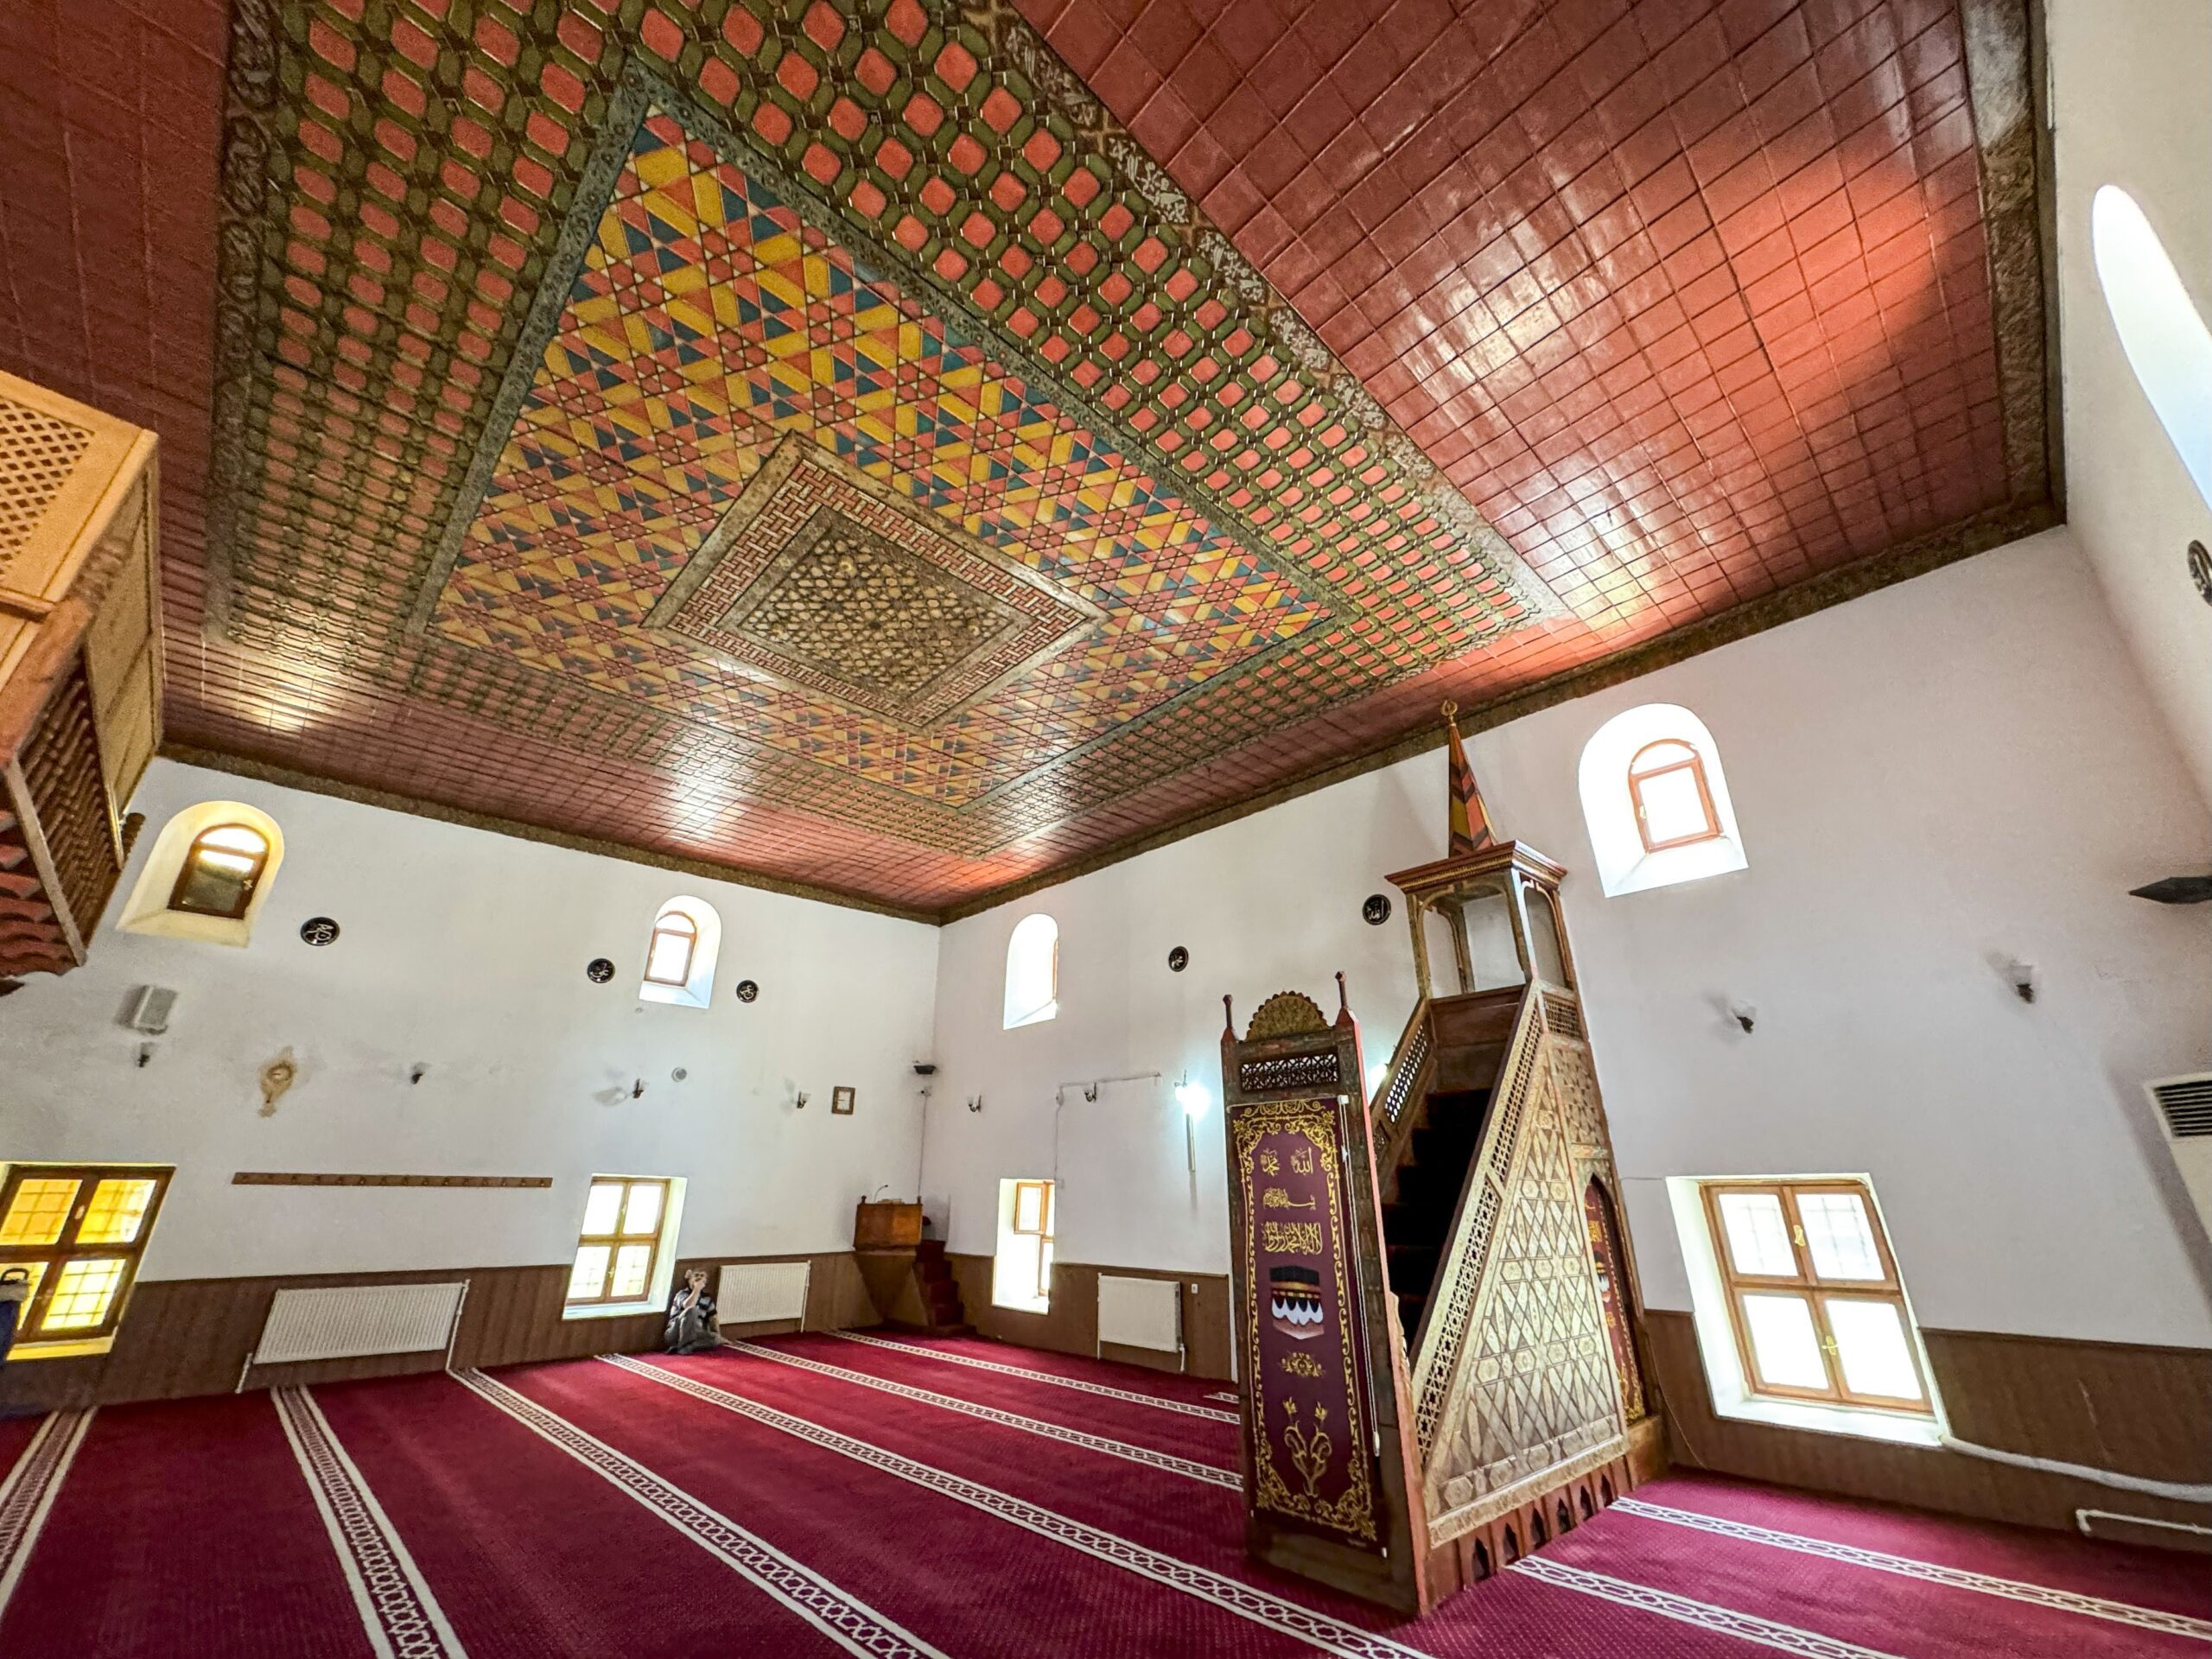 600-year-old mosque's intriguing wooden ceiling motifs captivate visitors